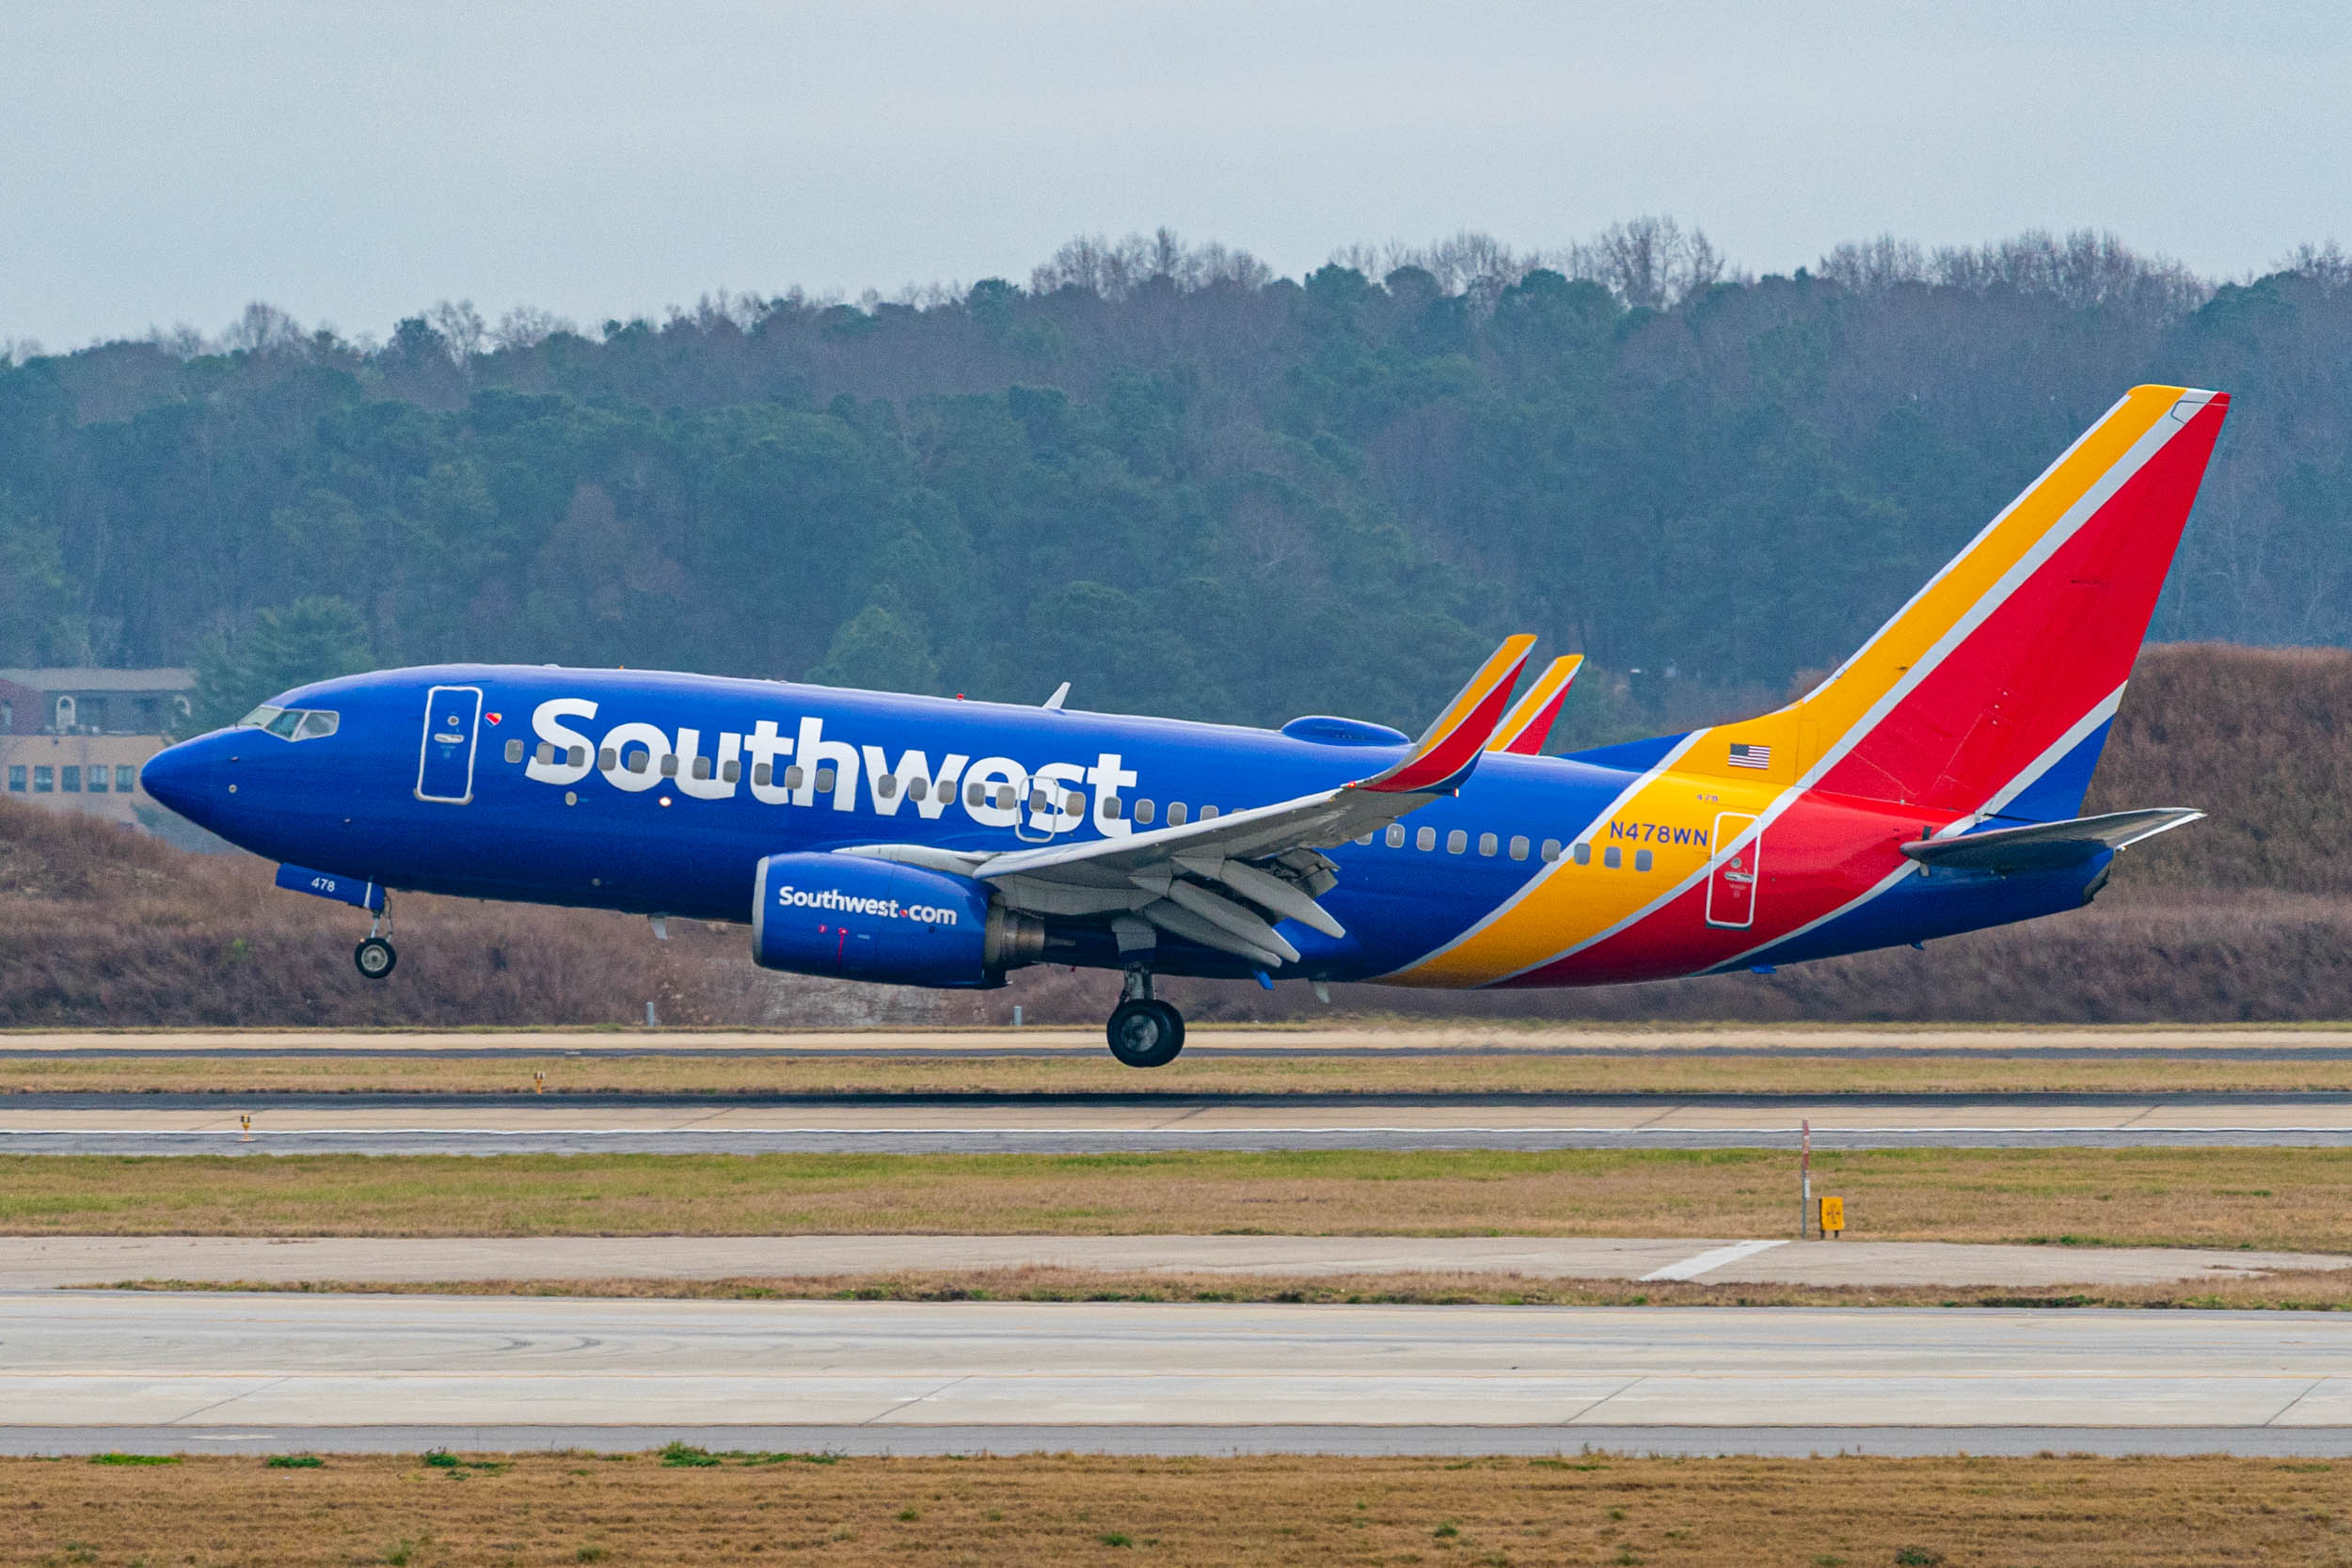 Southwest provides redeye flights, seat assignments and additional legroom